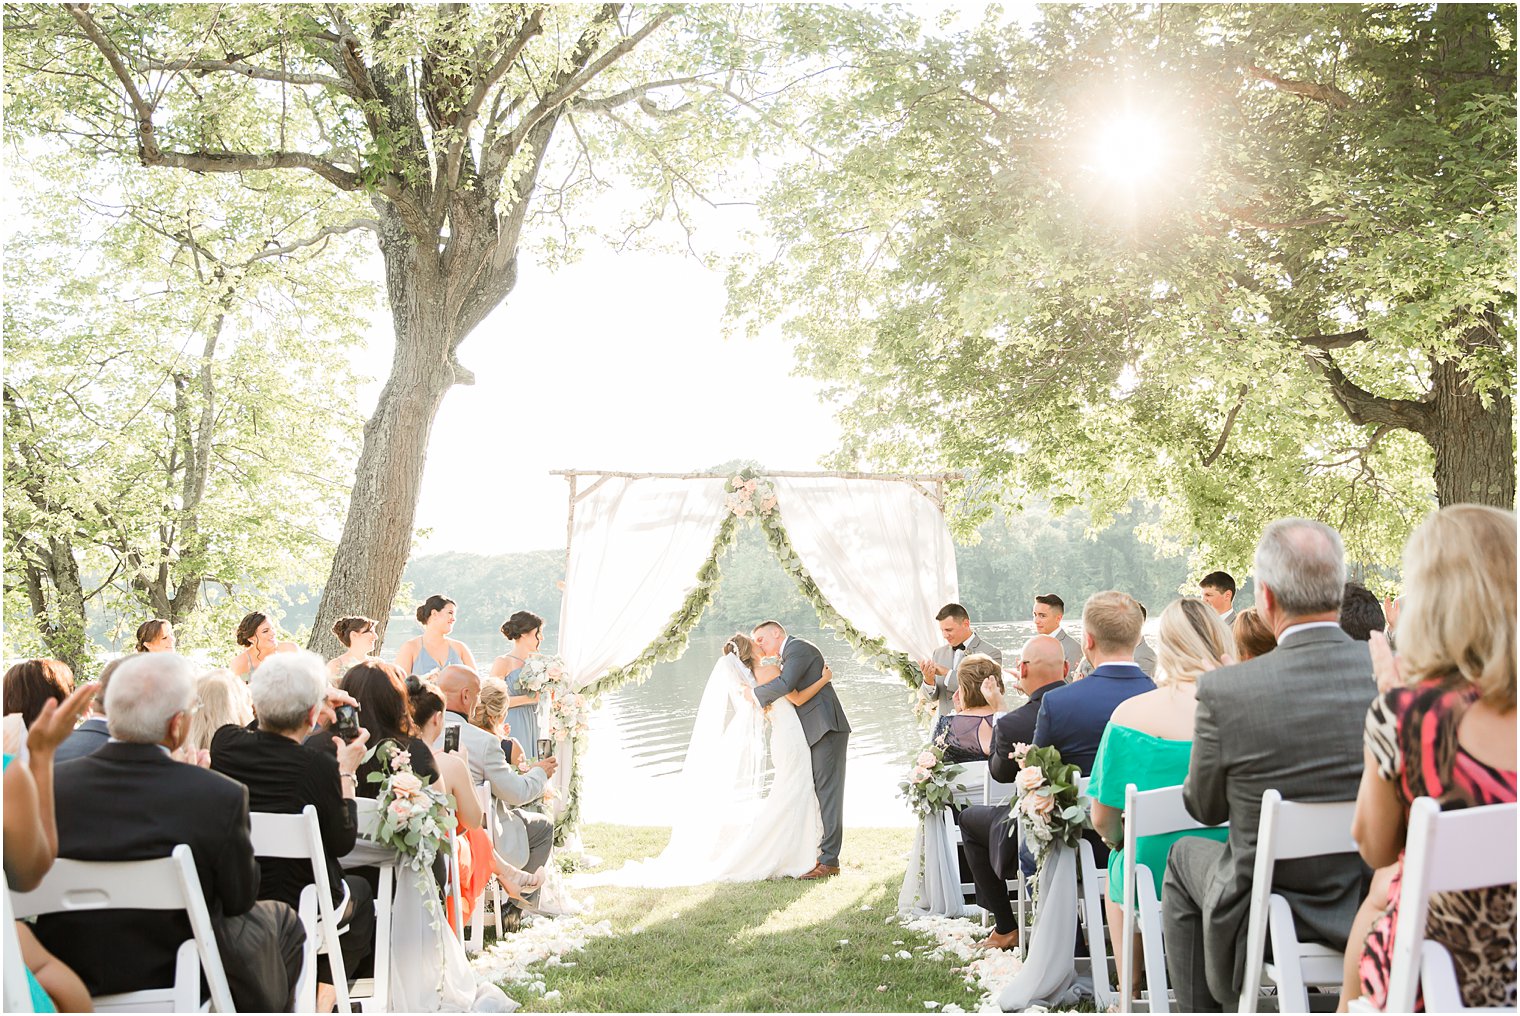 Outdoor ceremony at Indian Trail Club in Franklin Lakes, NJ